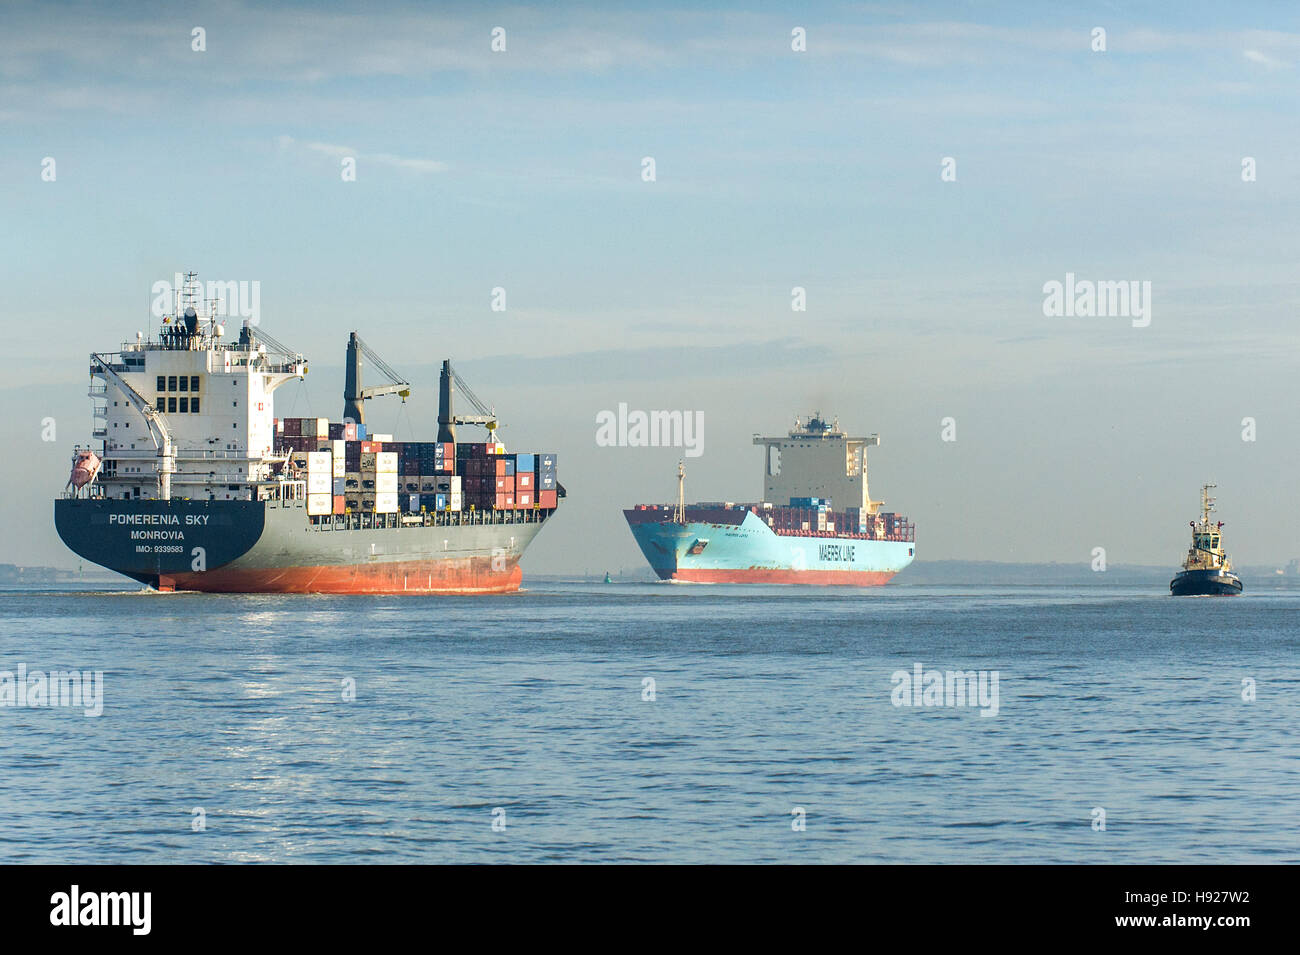 The container ship Pomerenia Sky steams downriver as the General Cargo Ship Maersk Lotus steams upriver on the River Thames. Stock Photo